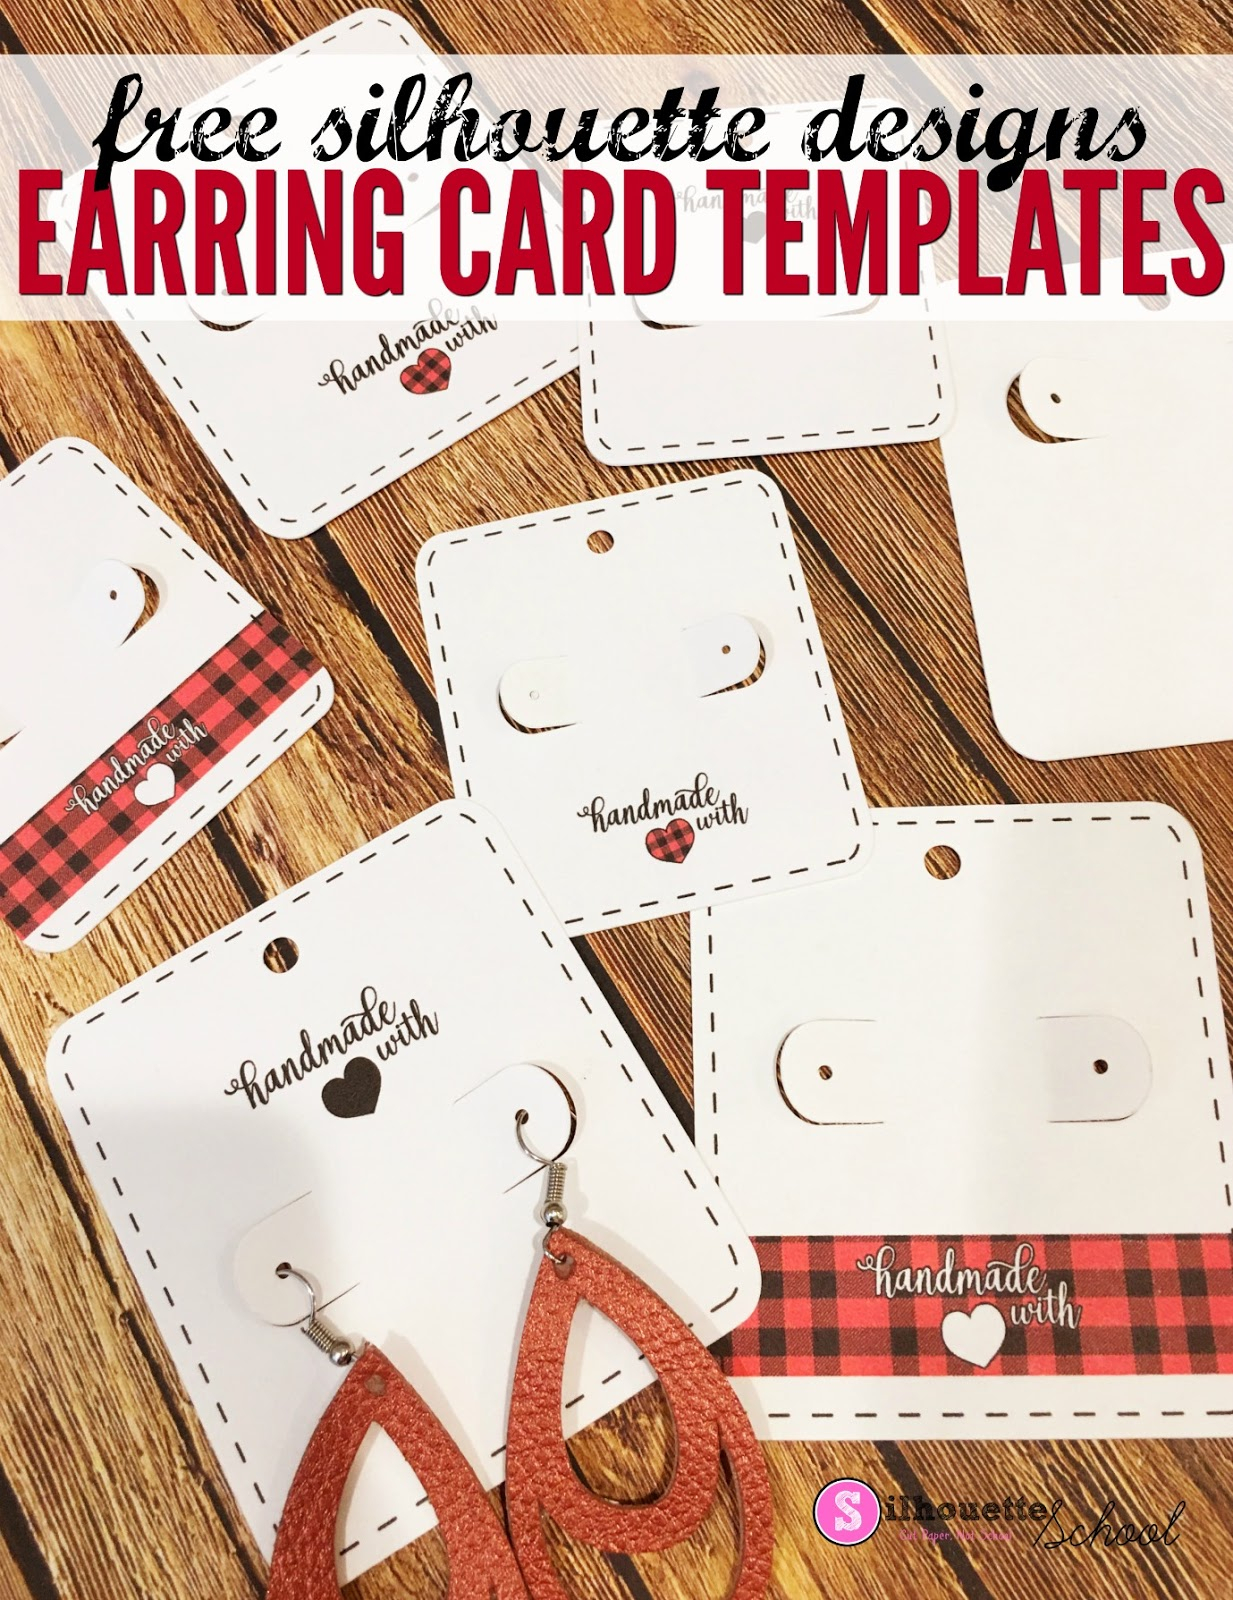 Free Silhouette Earring Card Templates (Set Of 8 Inside Silhouette Cameo Card Templates